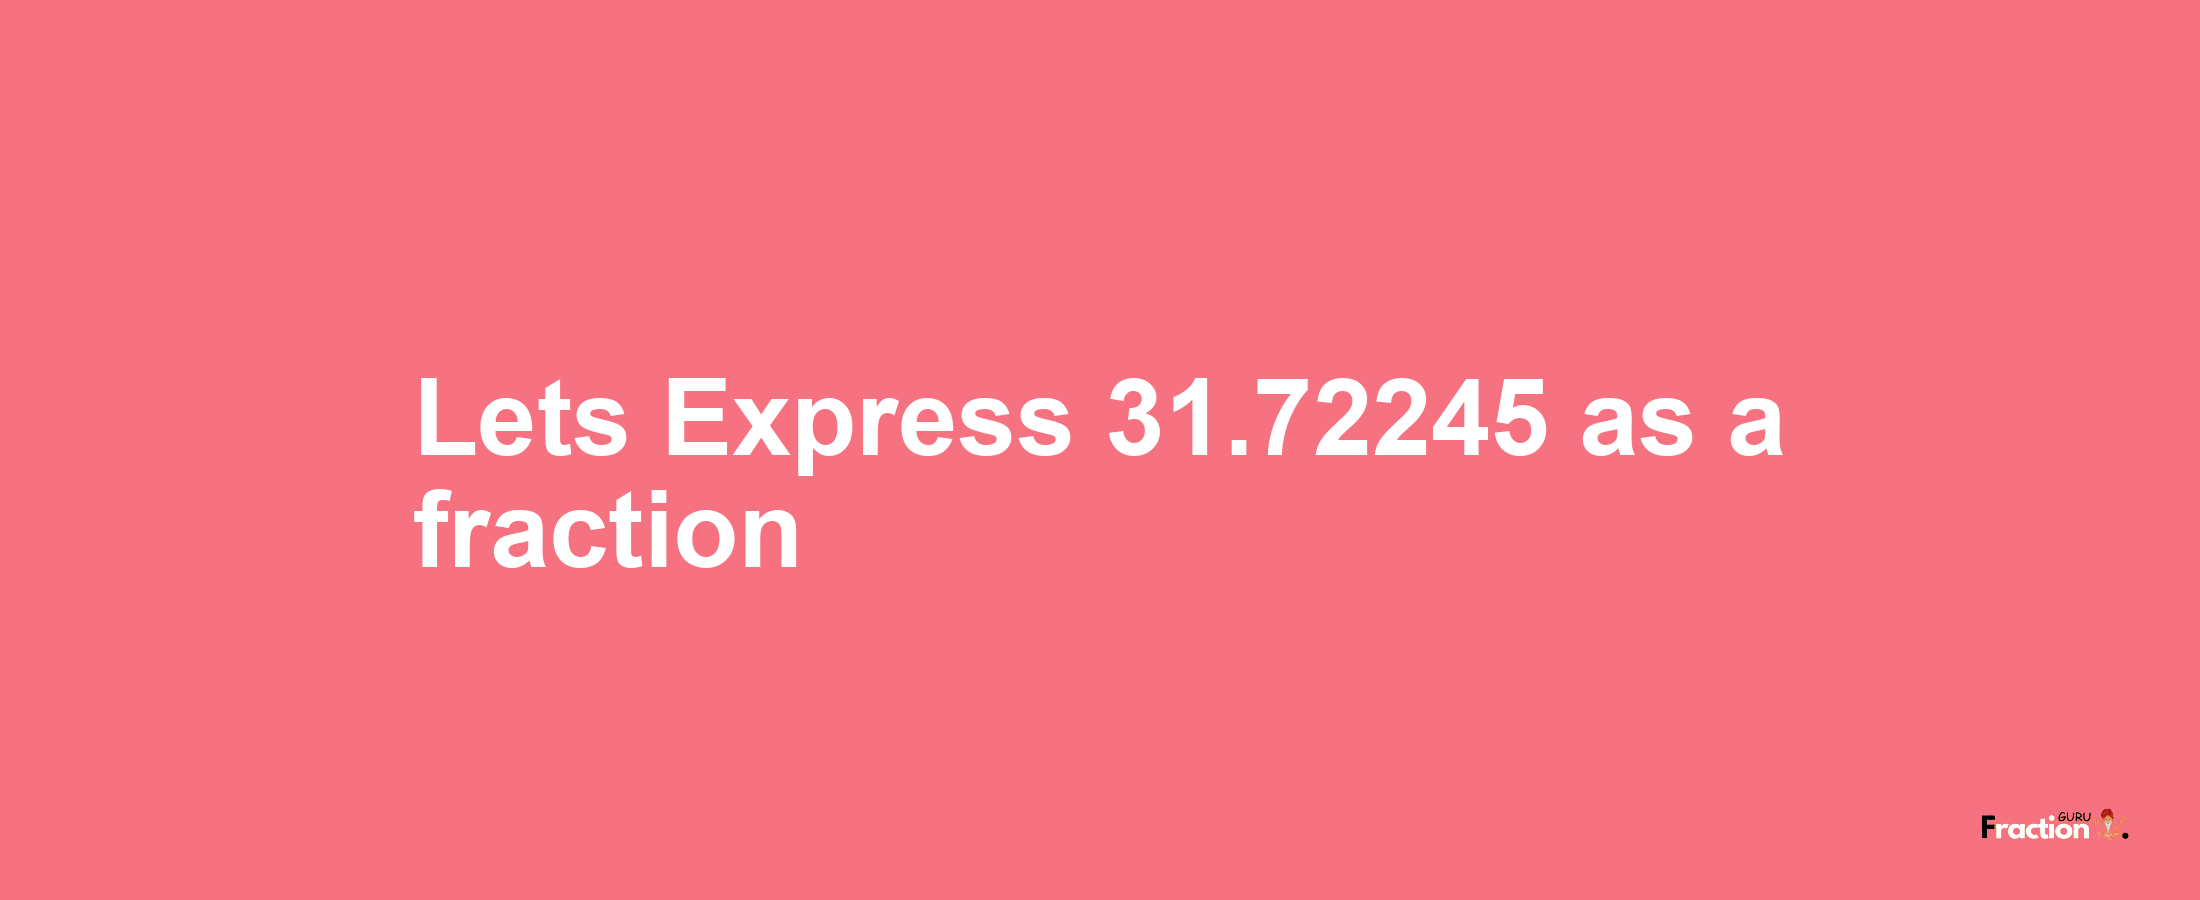 Lets Express 31.72245 as afraction